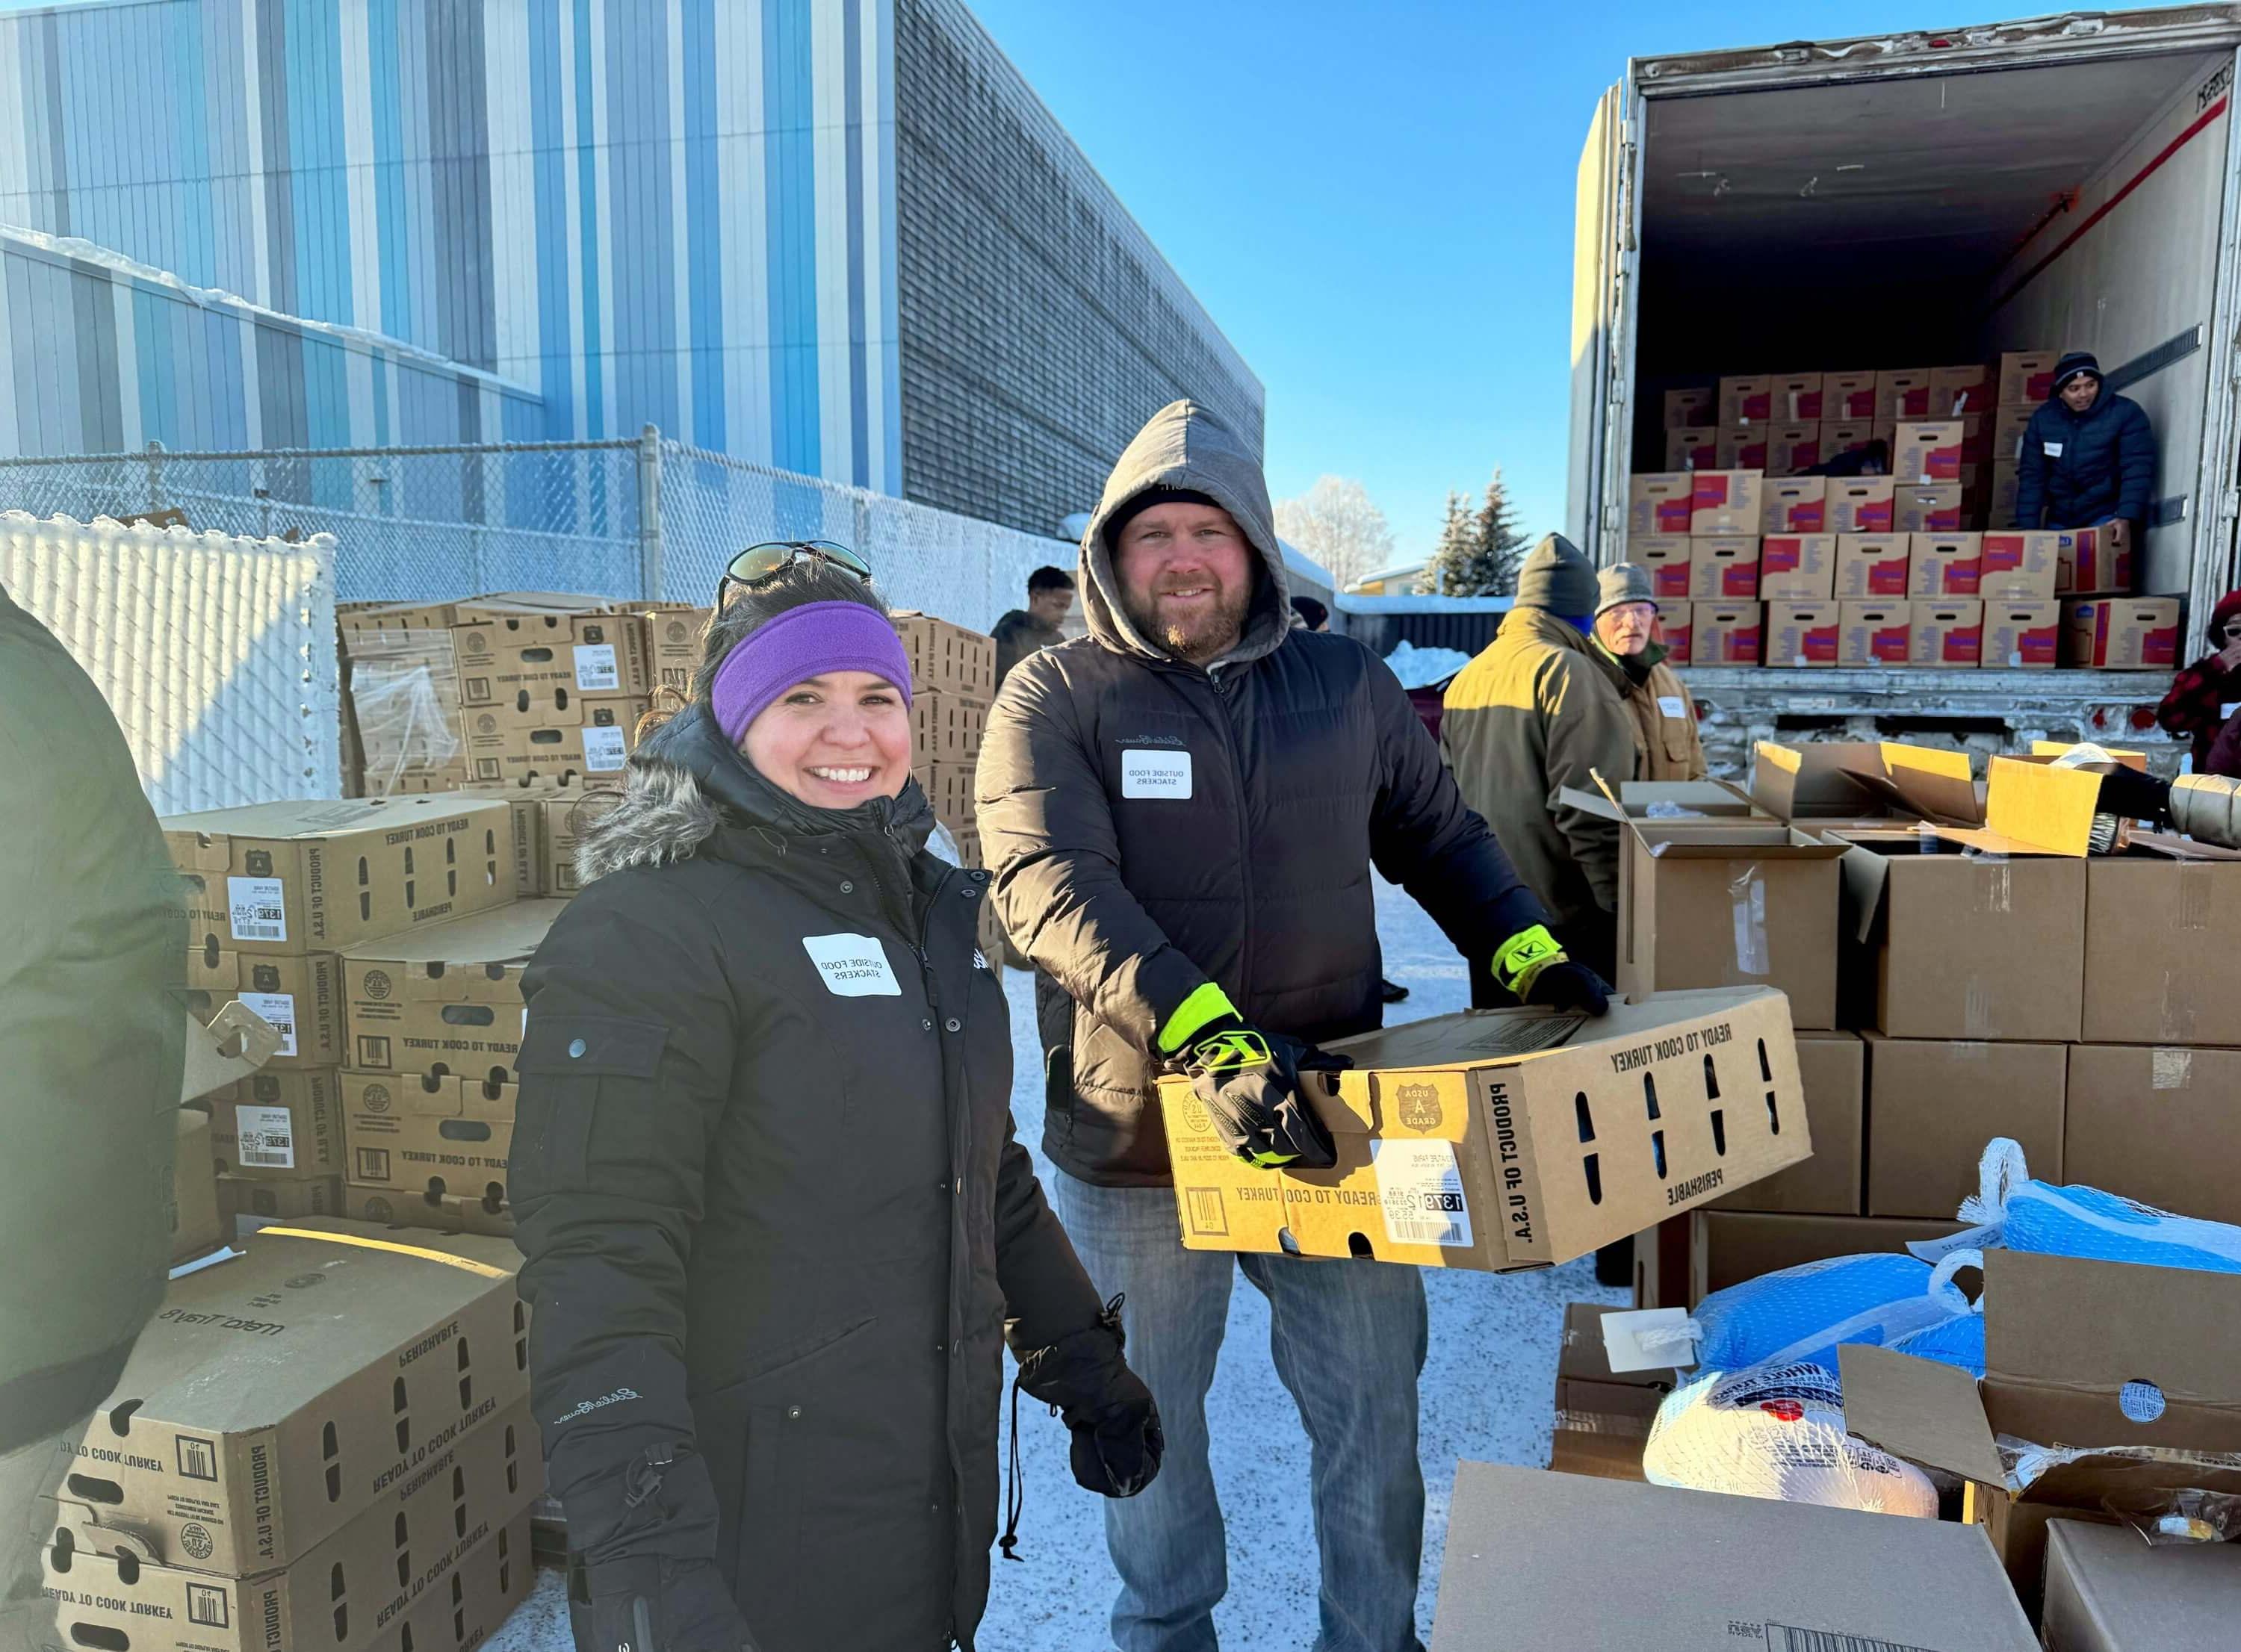 Standing outside and bundled in warm clothing, Joel and Jill Morse help move large boxes of food.